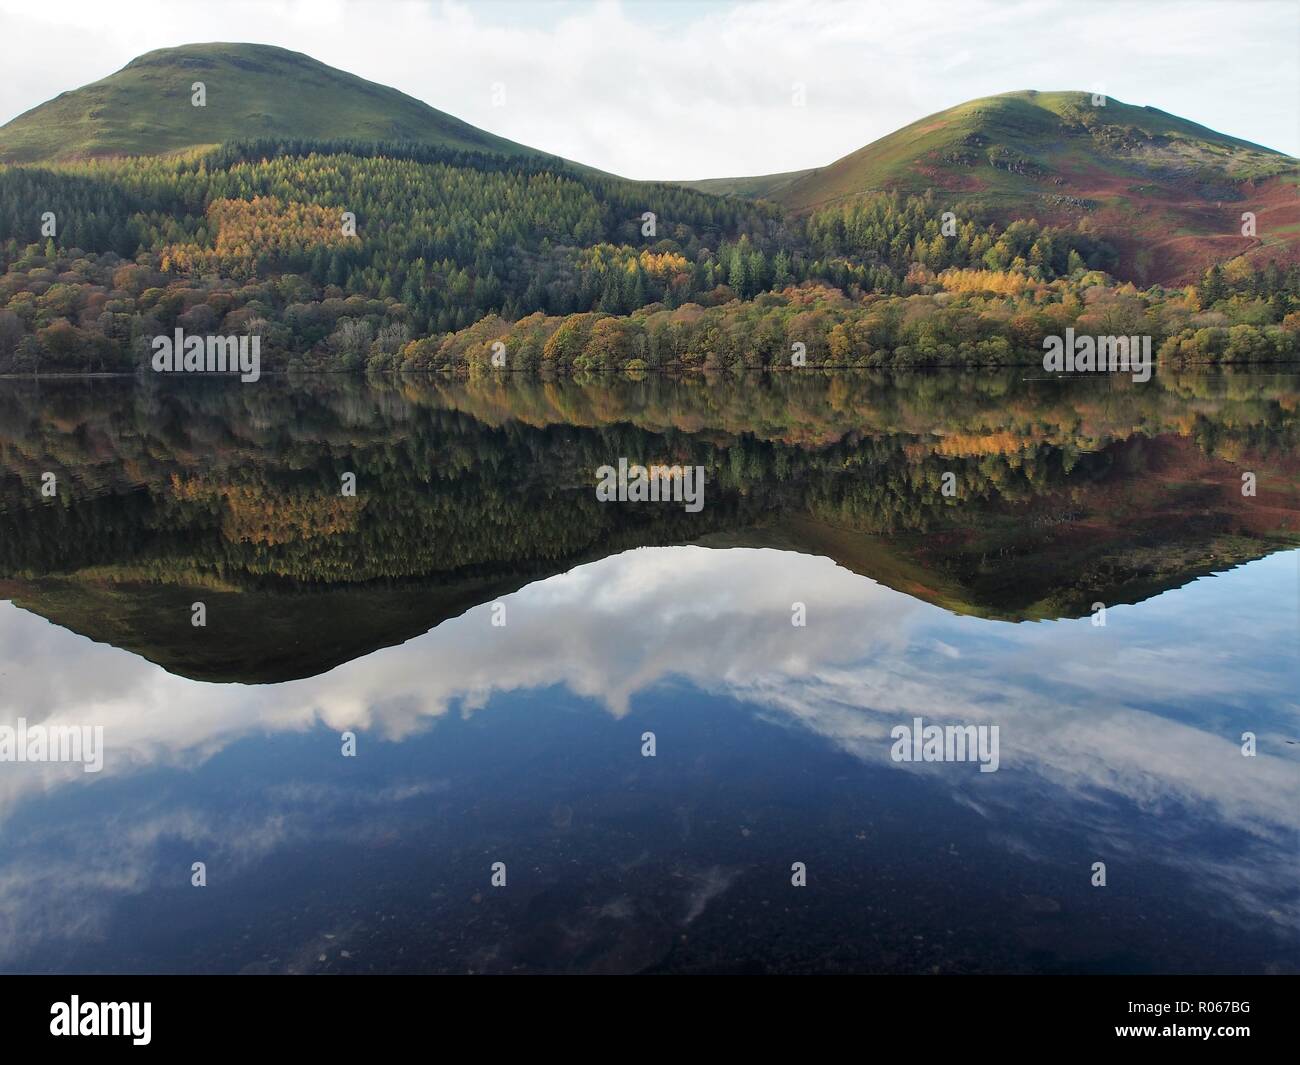 Holme Wood and hills above reflected in the still Loweswater, Lake District National Park, Cumbria, England, United Kingdom Stock Photo